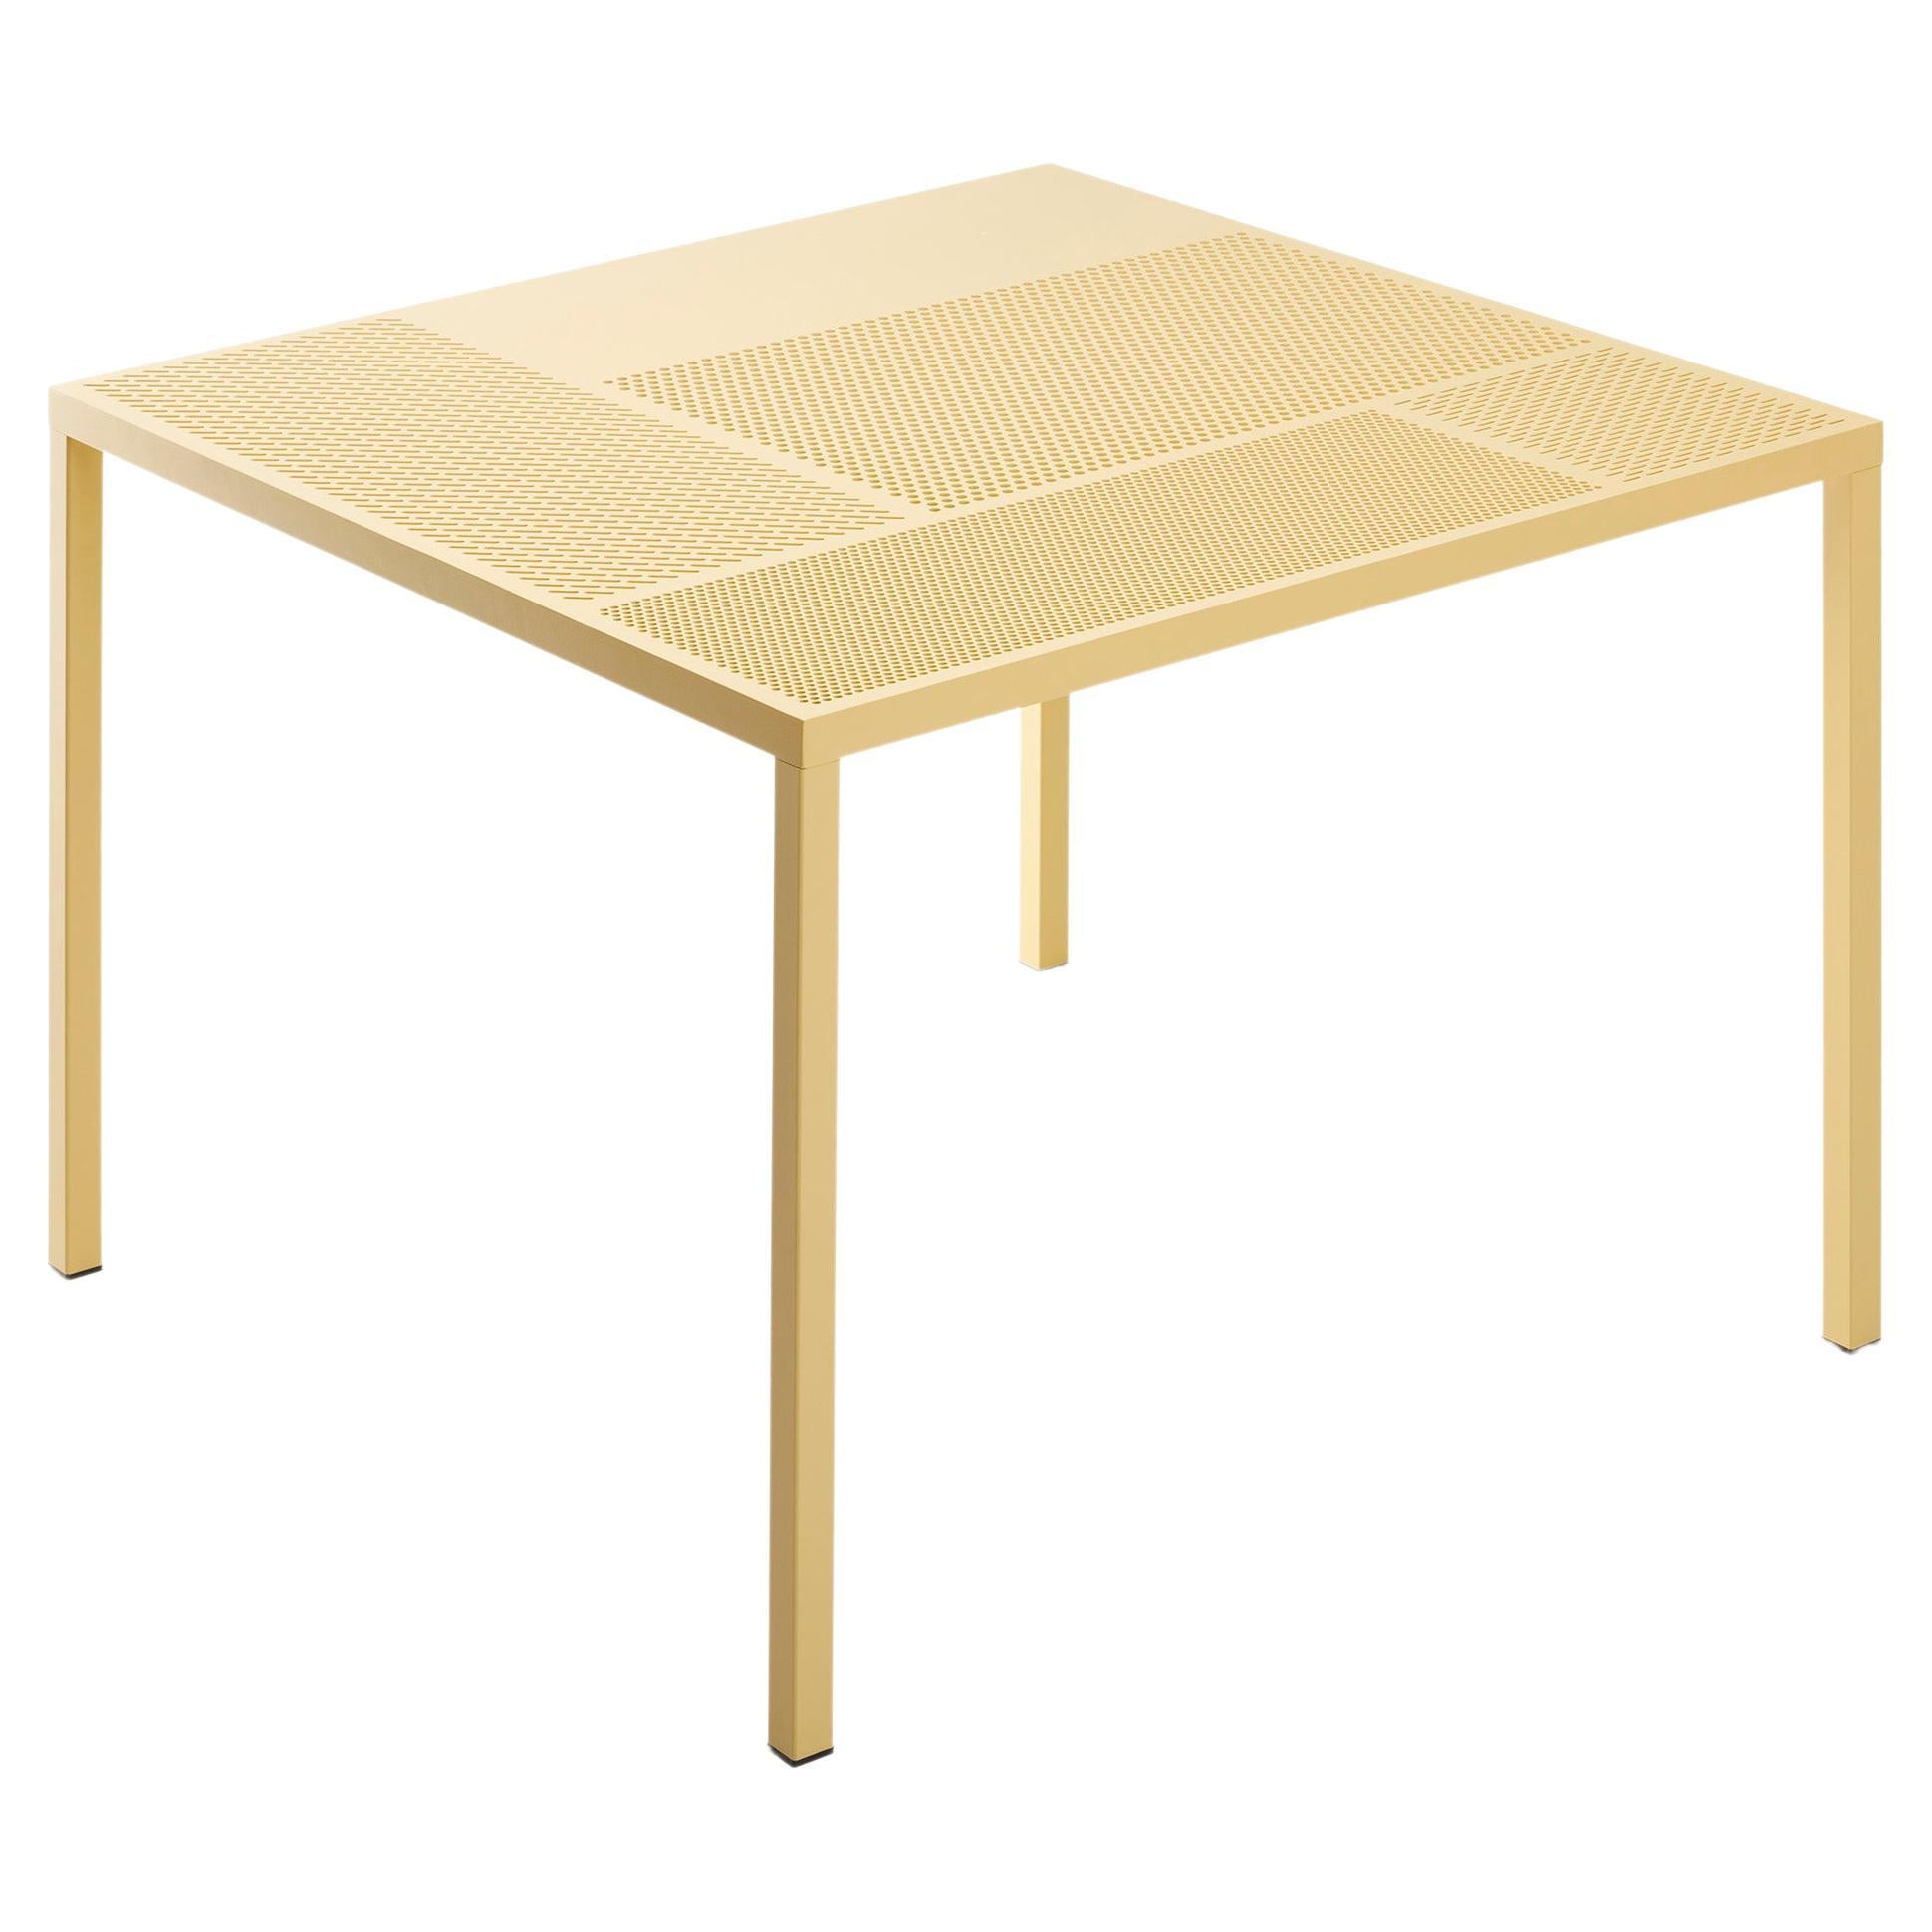 21st Century Modern Perforated Steel Sheet Table for Outdoor Neo Made in Italy